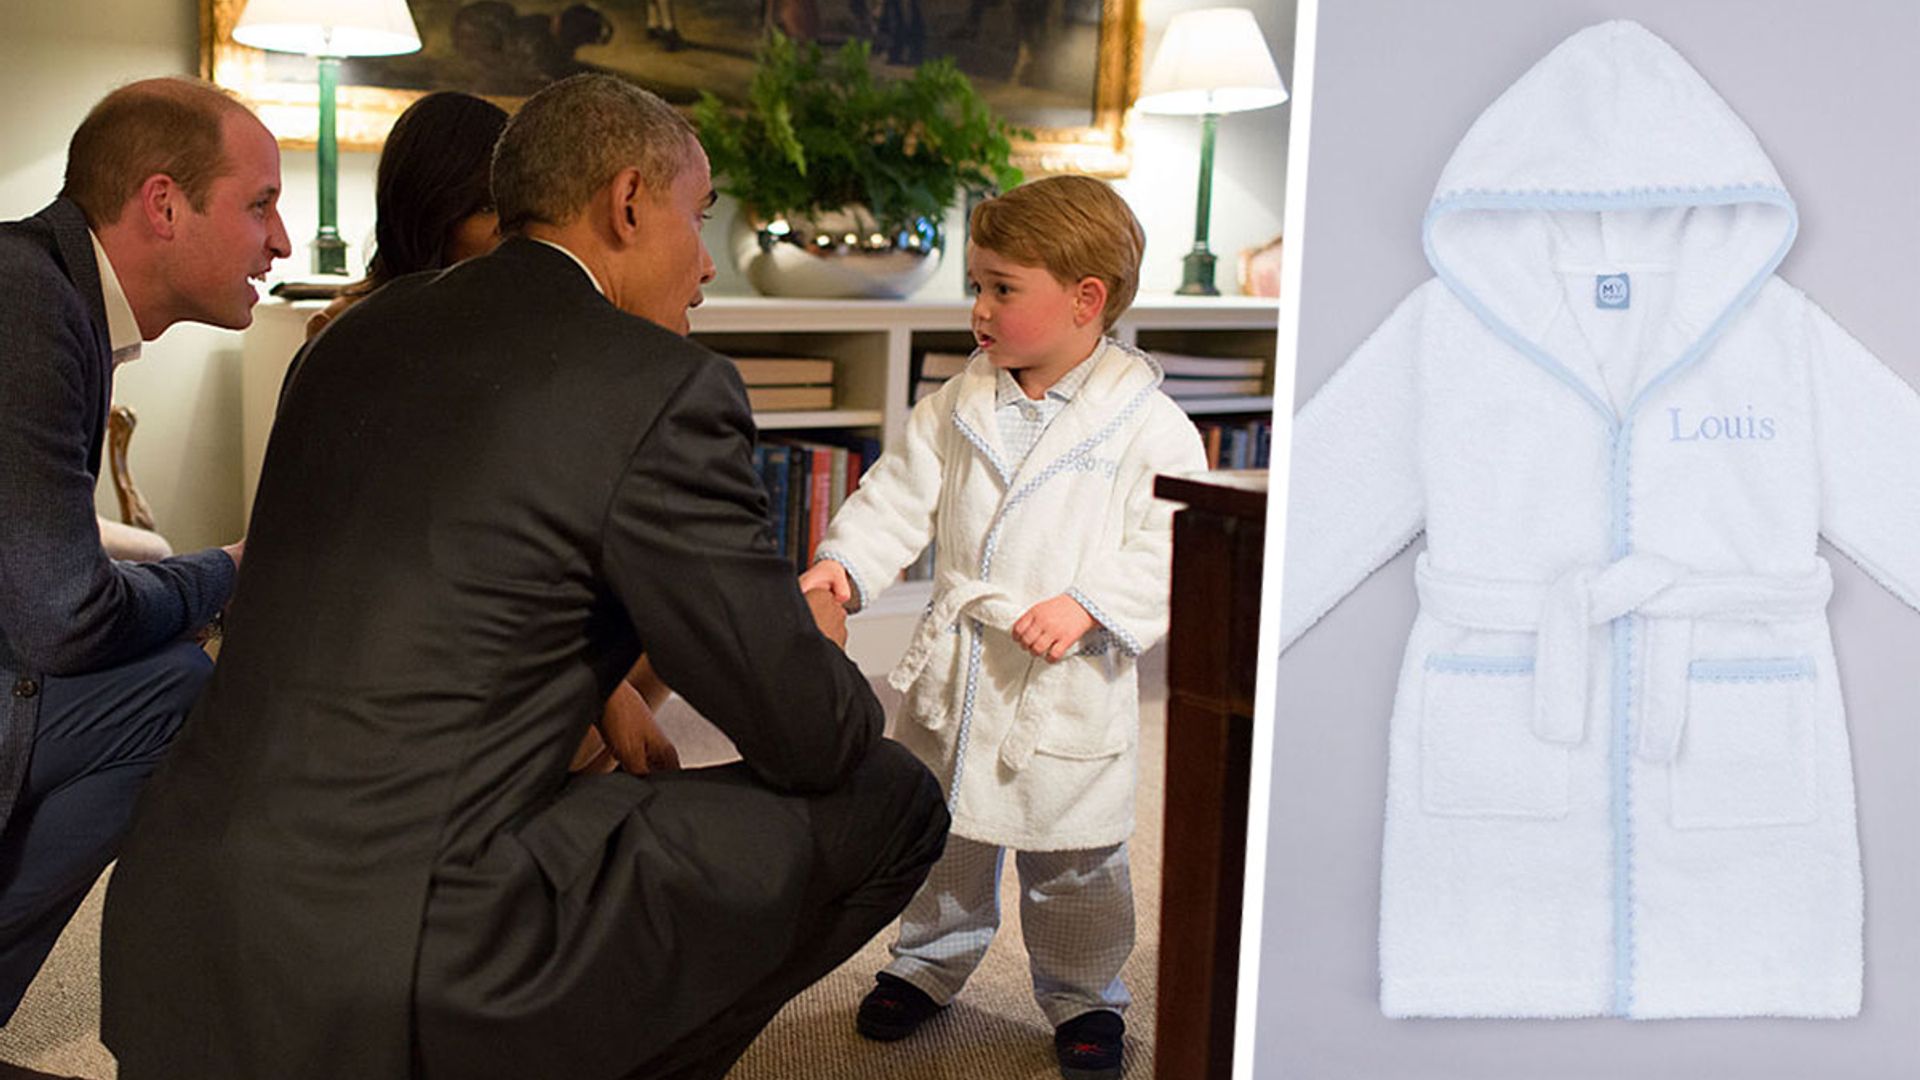 Prince George's iconic dressing gown from his meeting with Barack